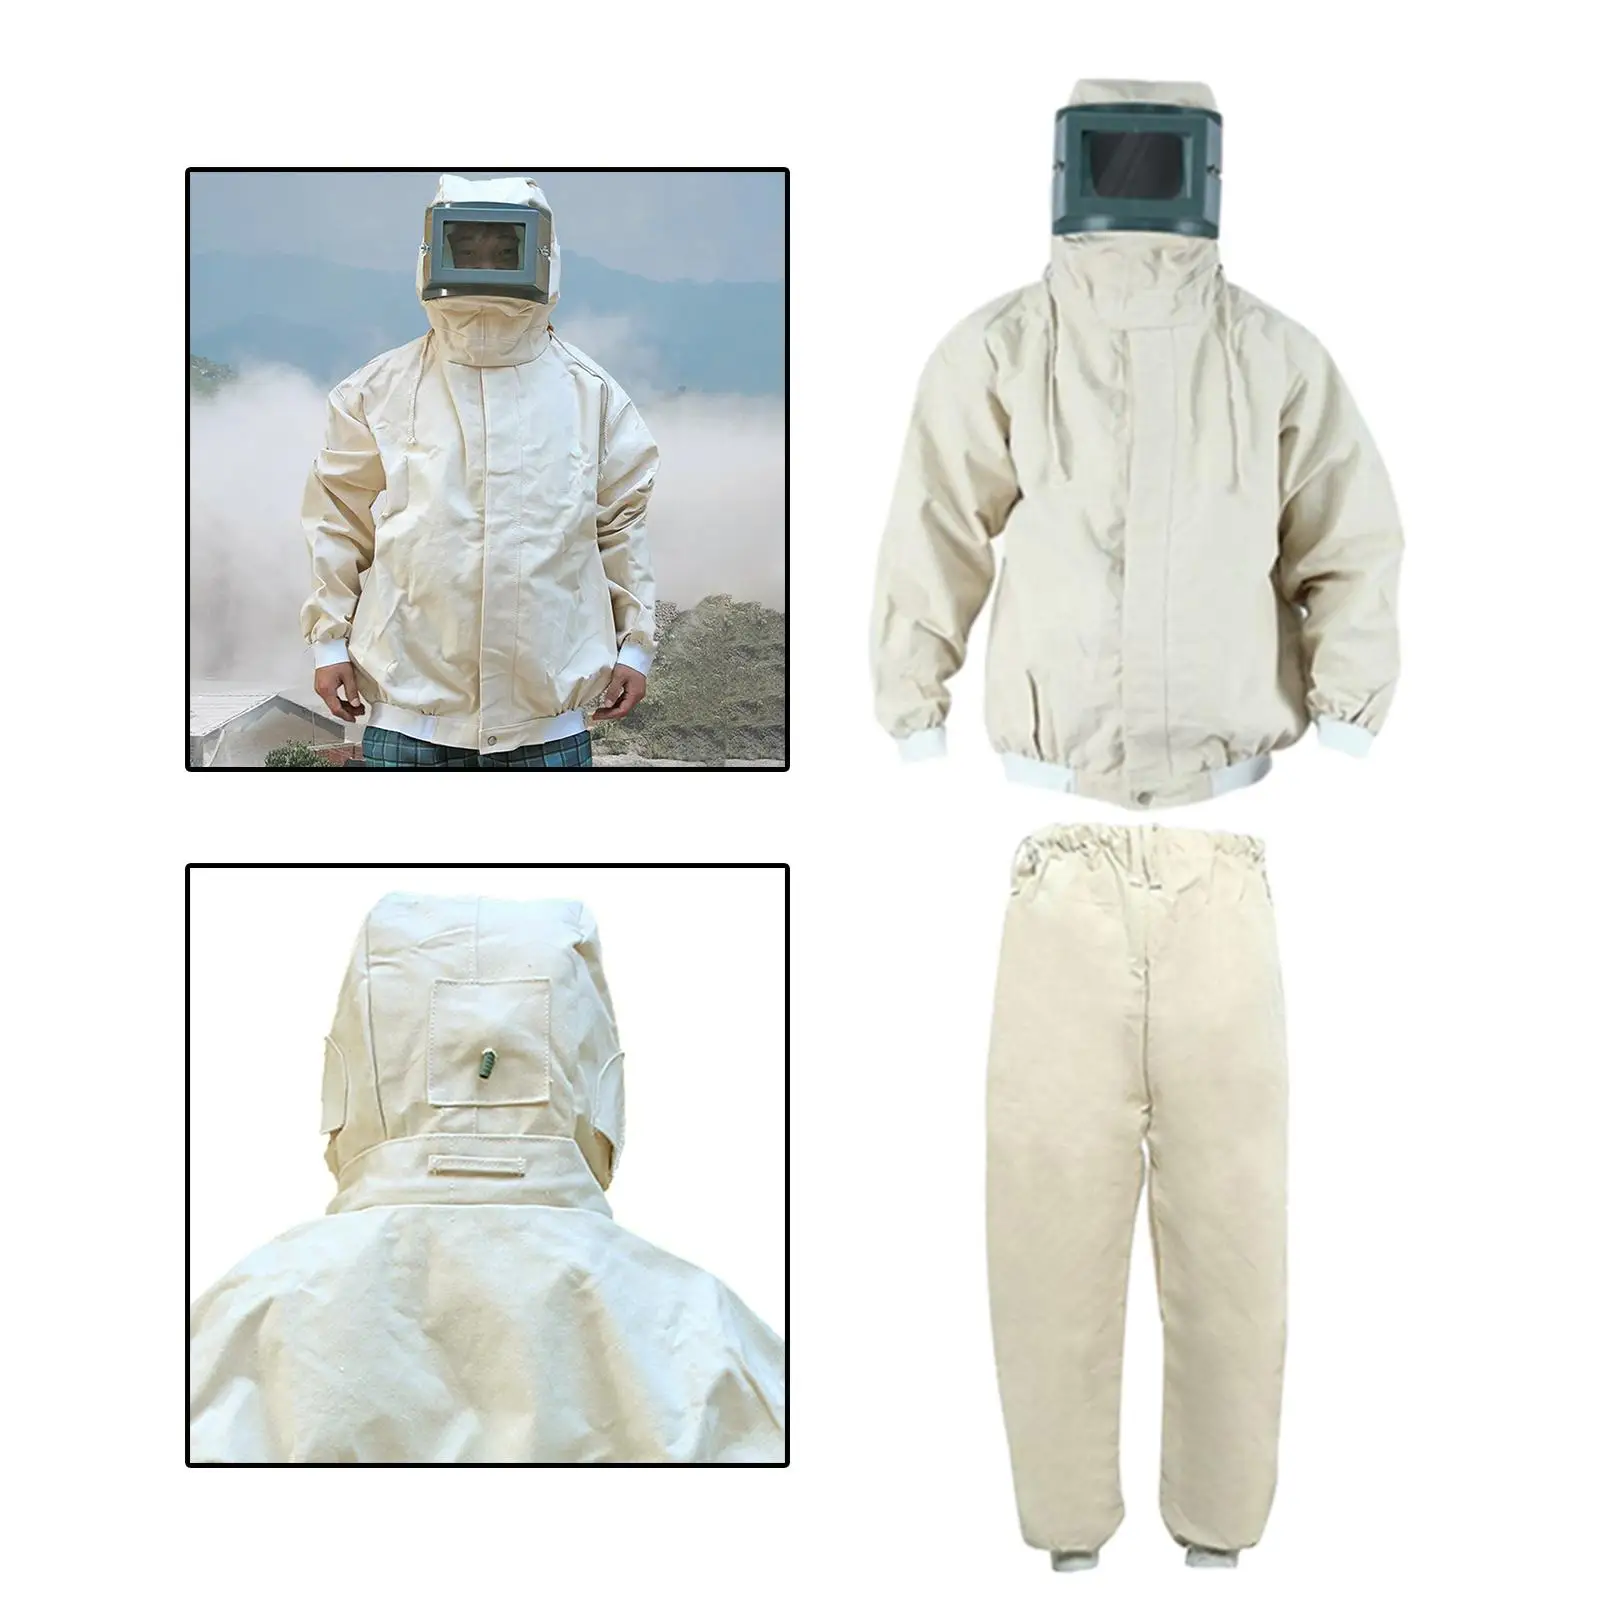 Extra Large Protective Coveralls Spray Paint Protective Clothes Professional Sandblasting Clothing for Shipbuilding Woodworking